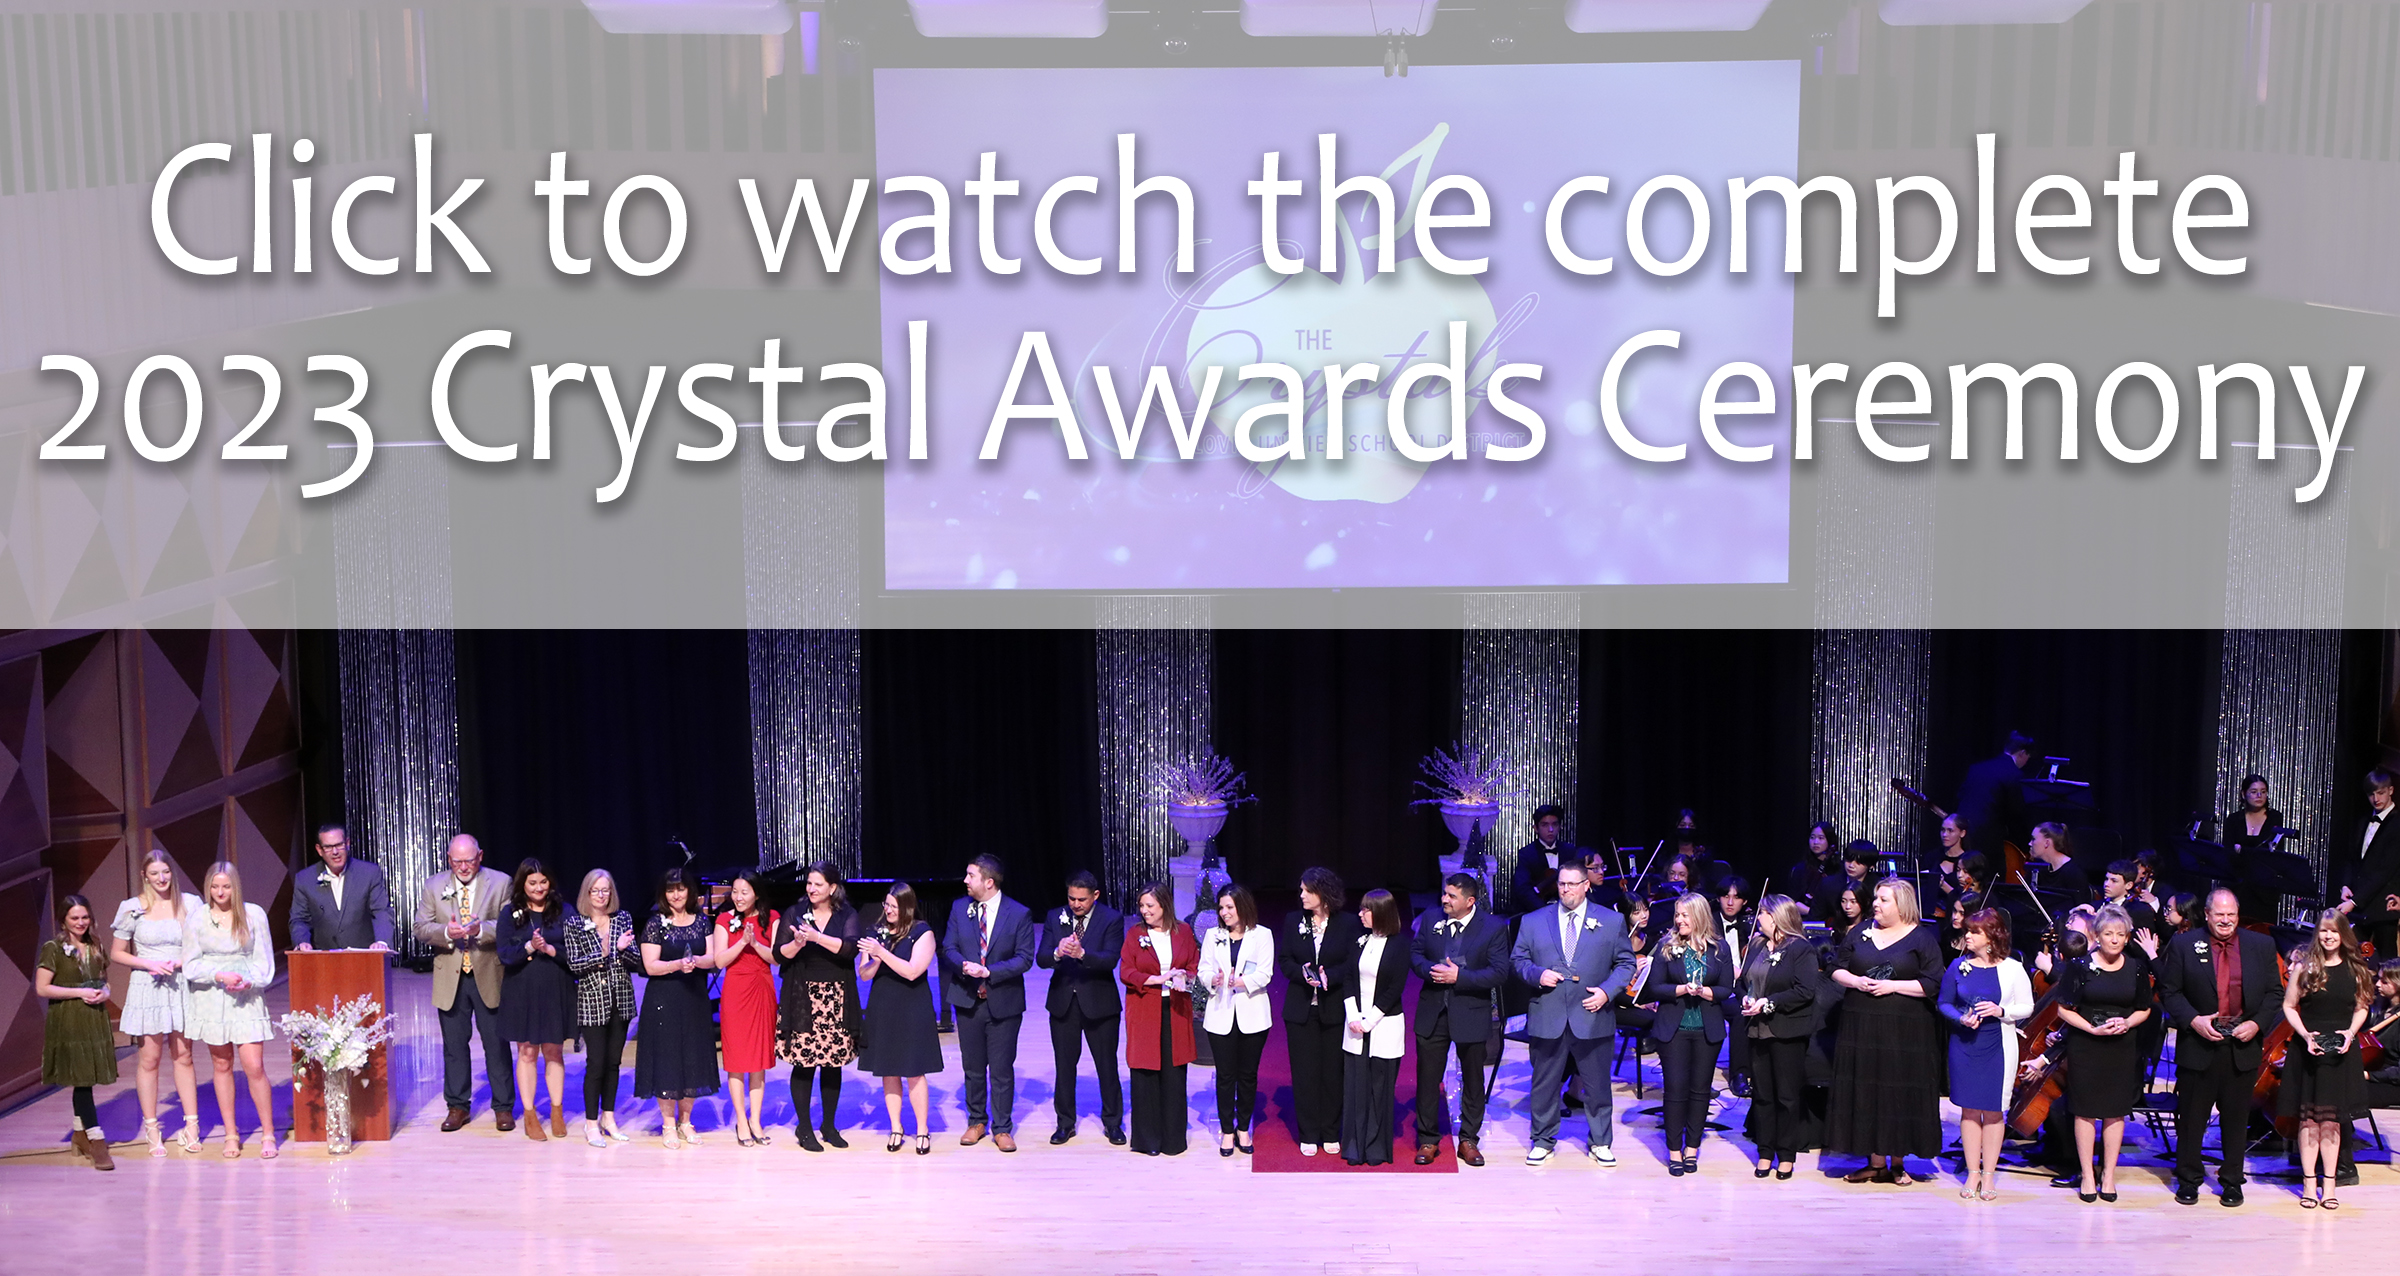 Click to watch the complete 2023 Crystal Awards Ceremony